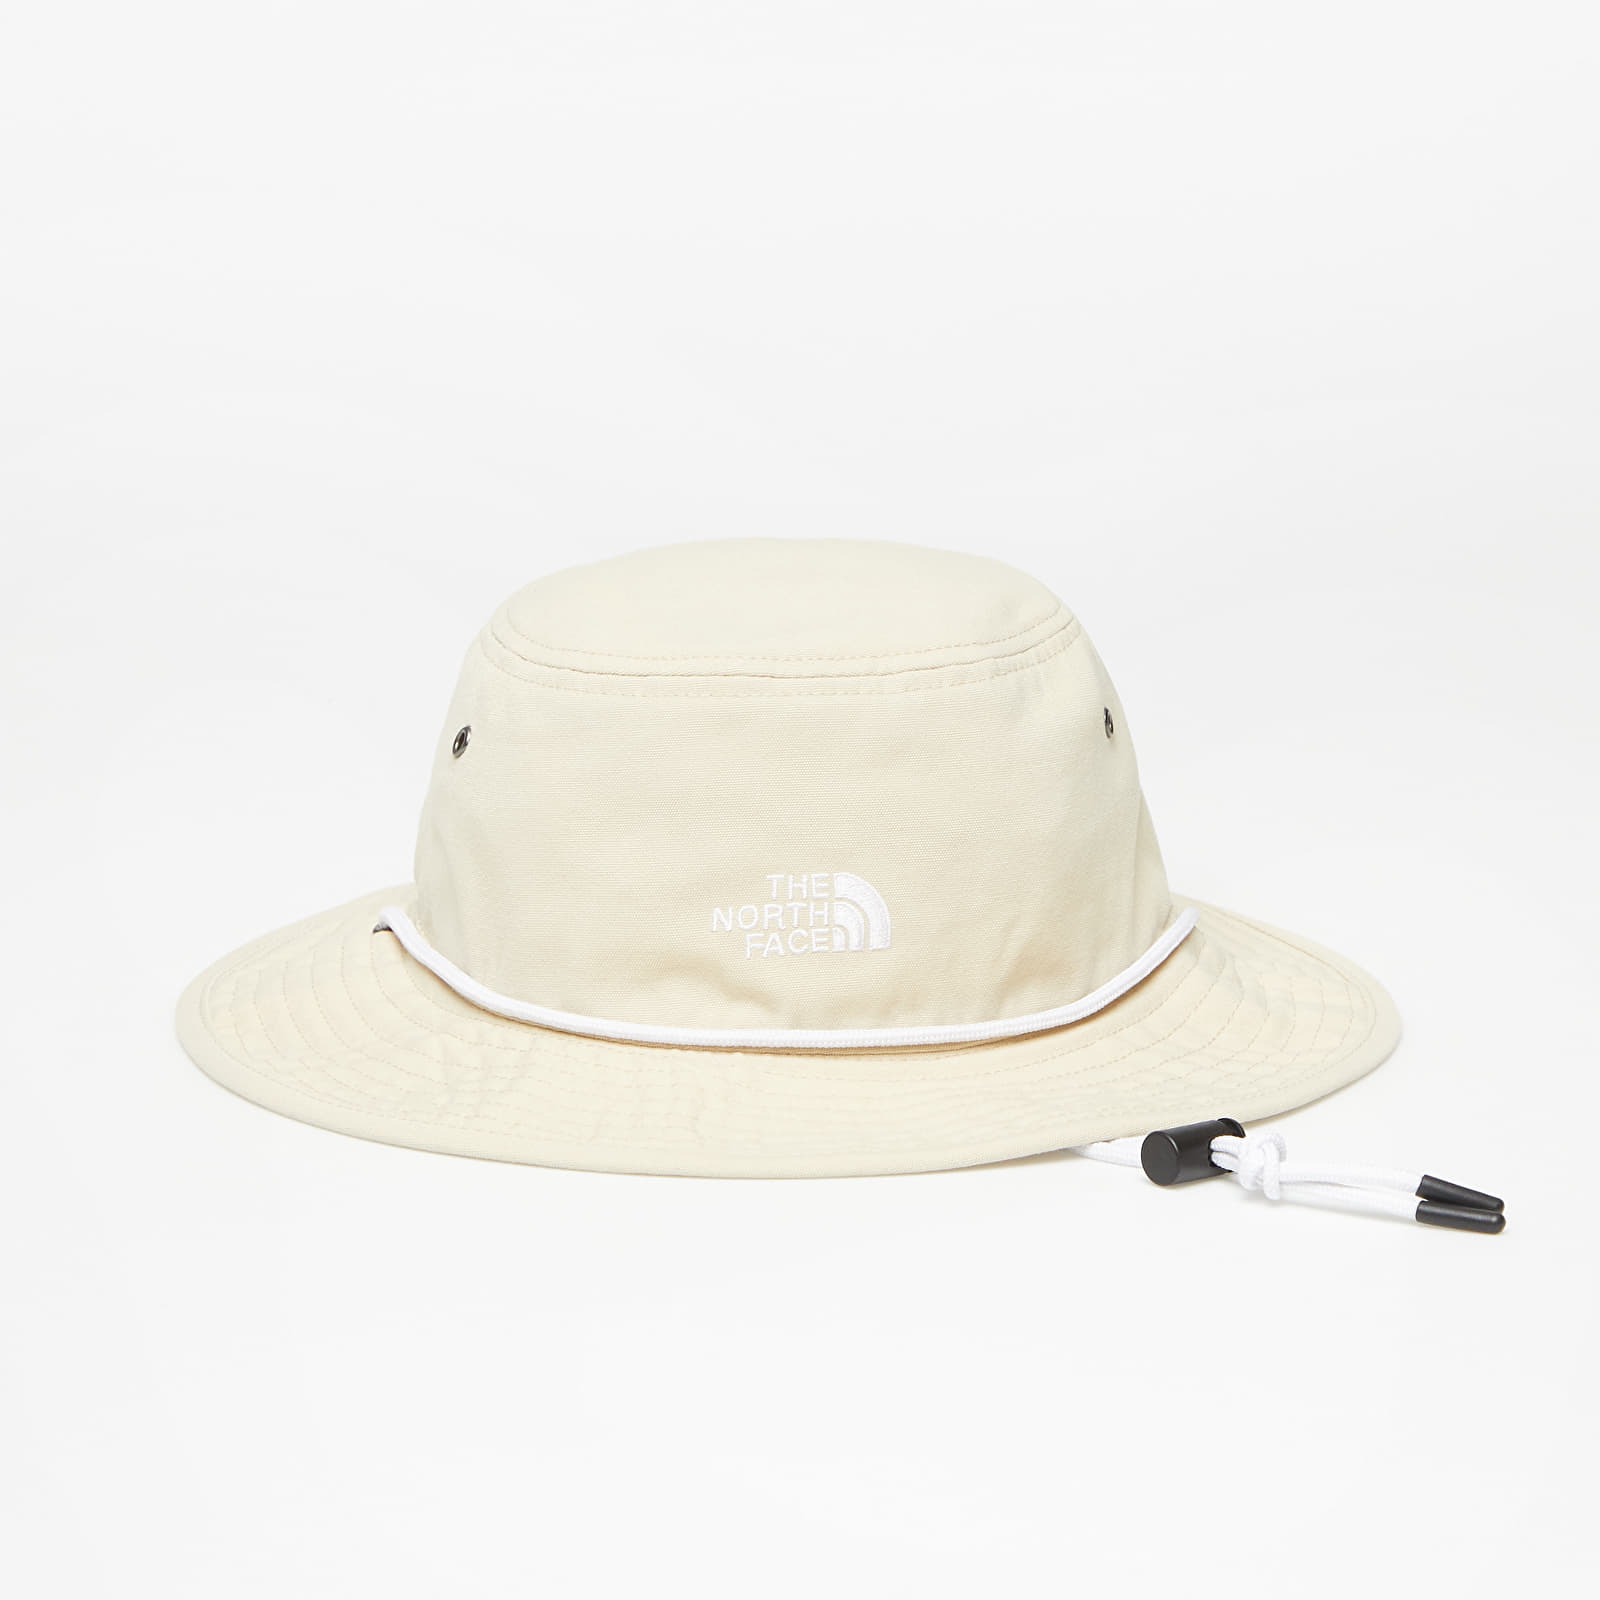 The North Face - recycled 66 brimmer hat gravel